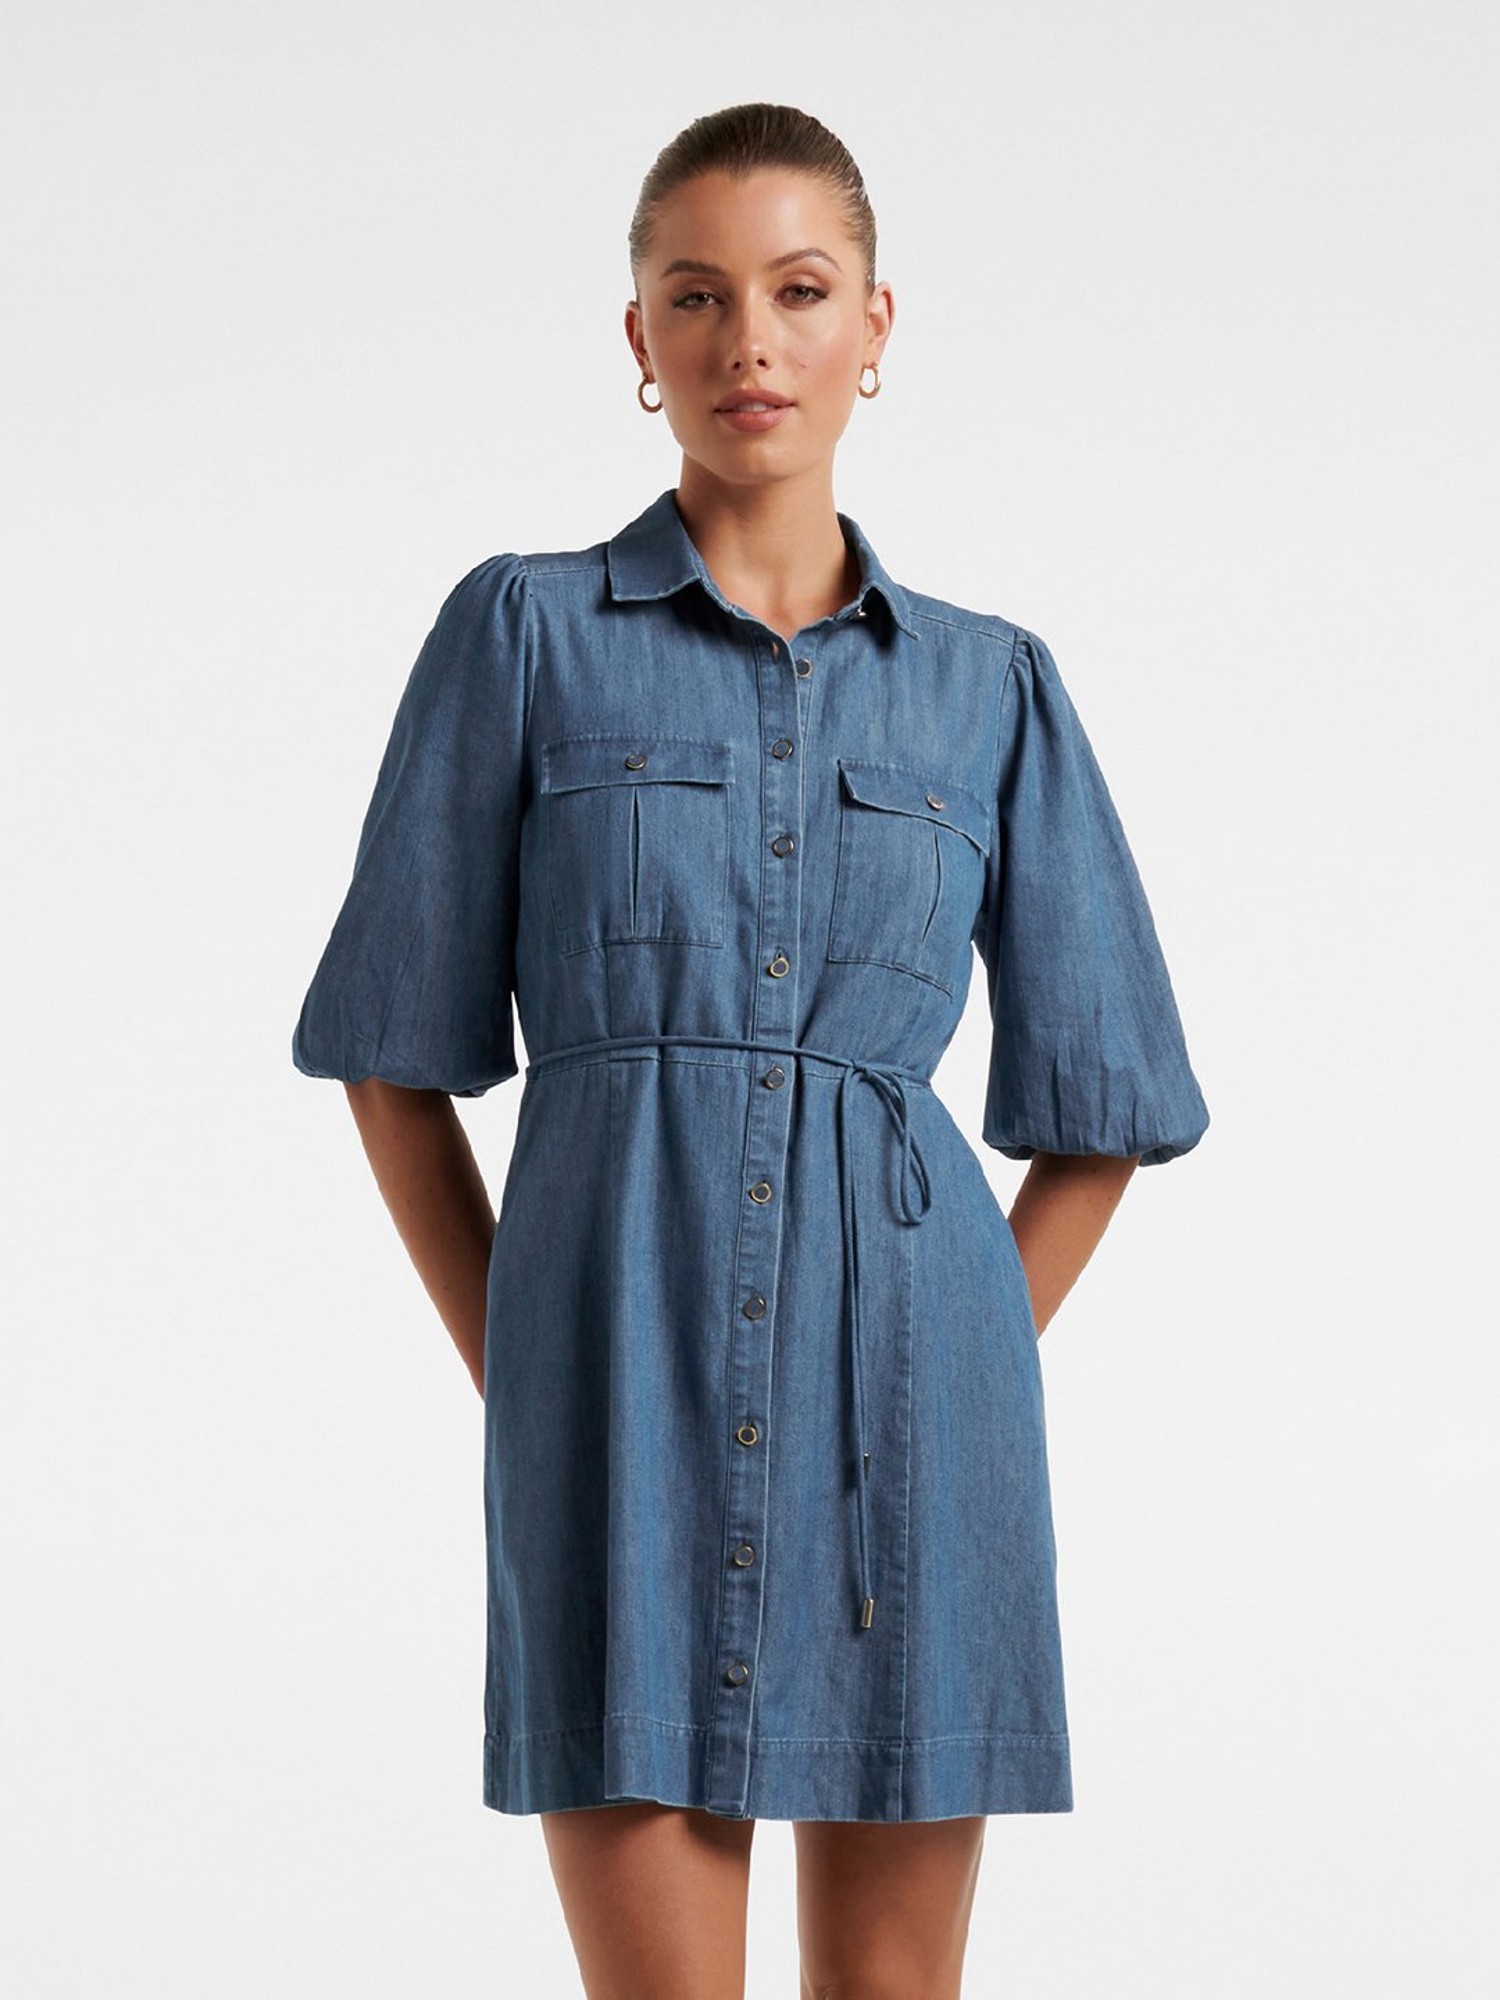 Three Outfits, One Dress | Chambray shirt outfits, Shirt over dress, Shirt  dress outfit